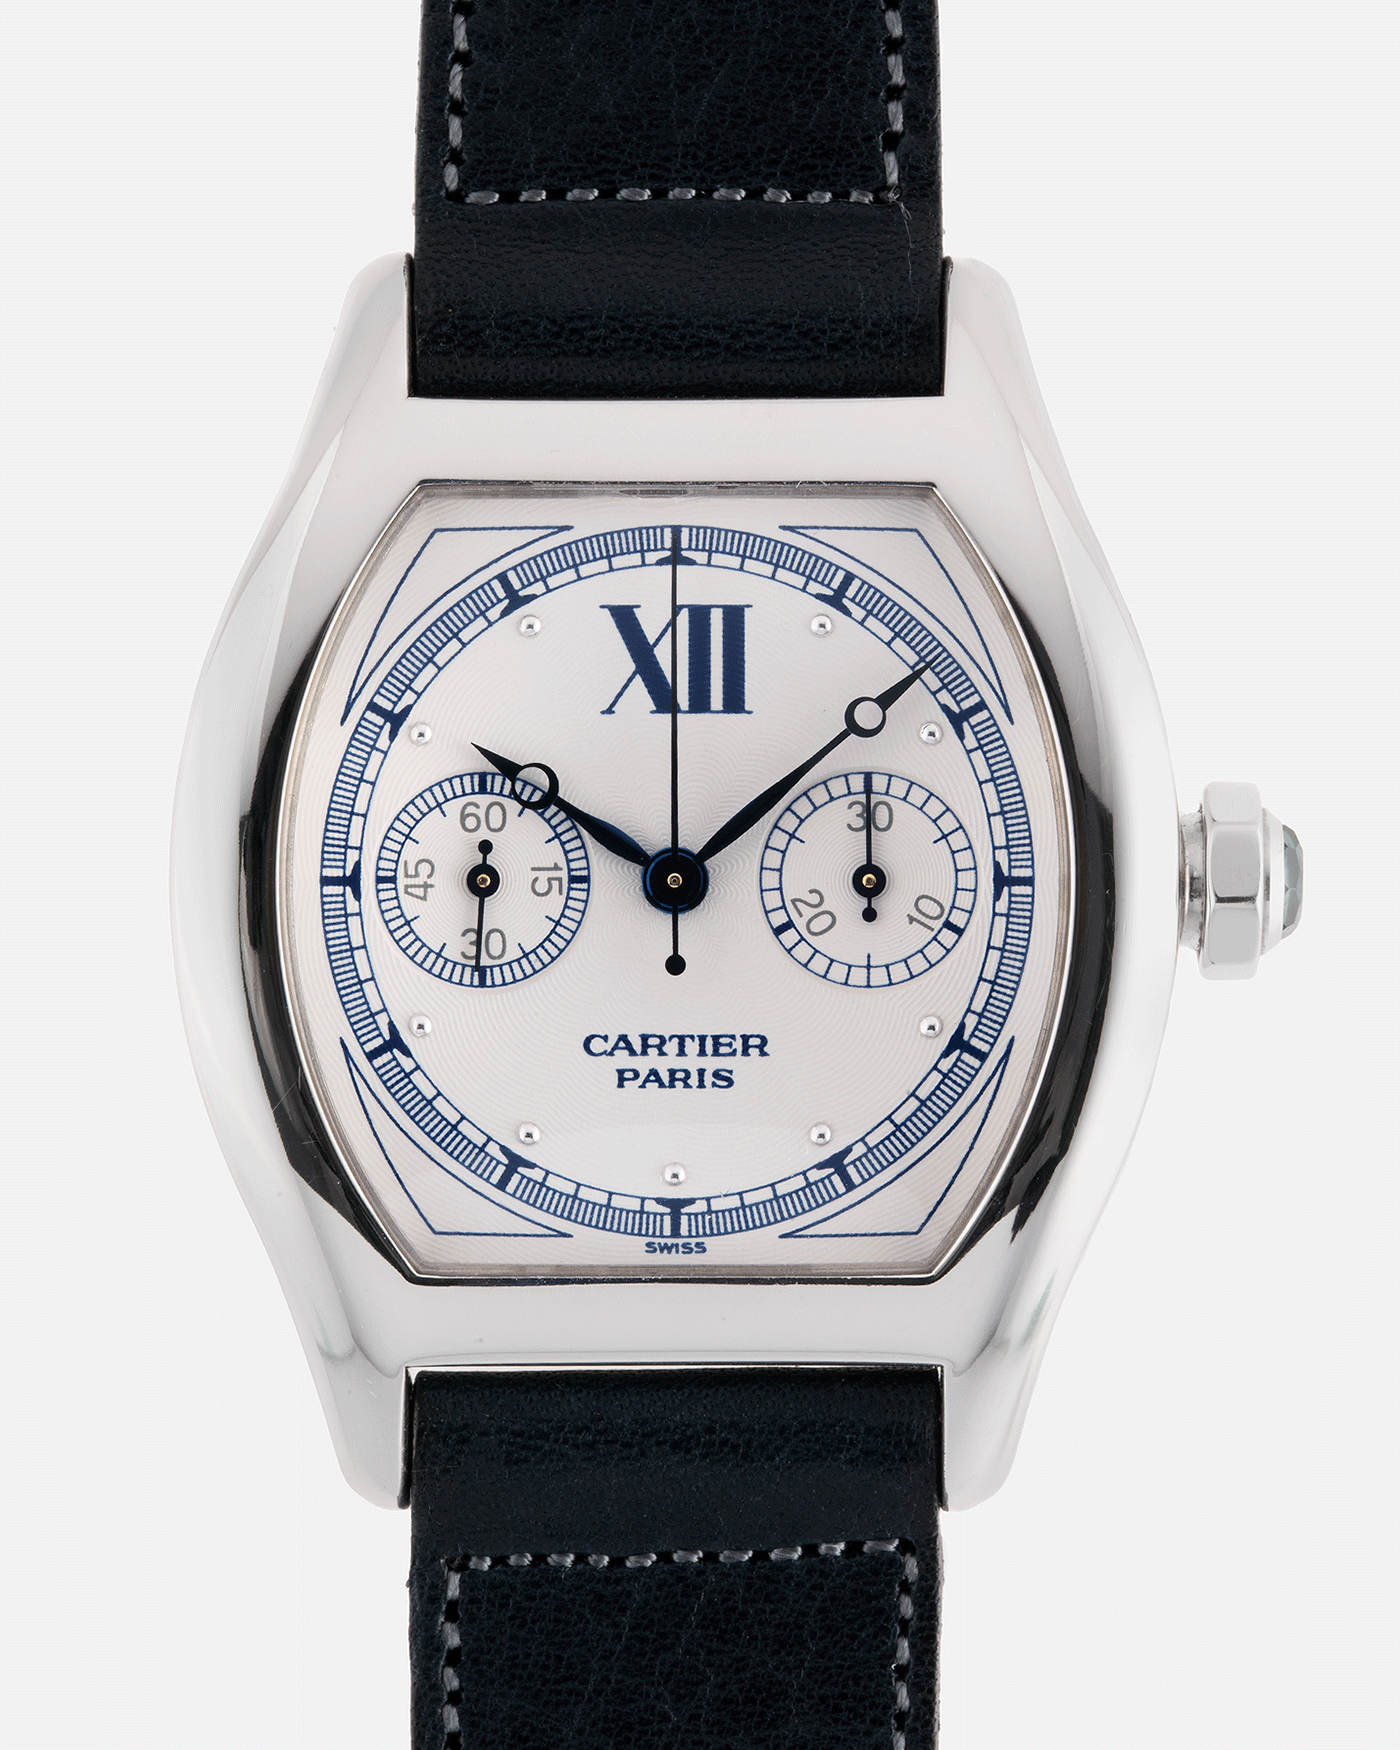 Brand: Cartier Year: 2000’s Model: CPCP Collection Prive Tortue Monopoussoir Reference: 2356 Material: 18k White Gold Movement: THA Cal. 045MC Case Diameter: 43 x 35 mm Strap: Navy Blue Accurate Form Japanese Calf Strap with separate 18k Cartier White Gold Deployant